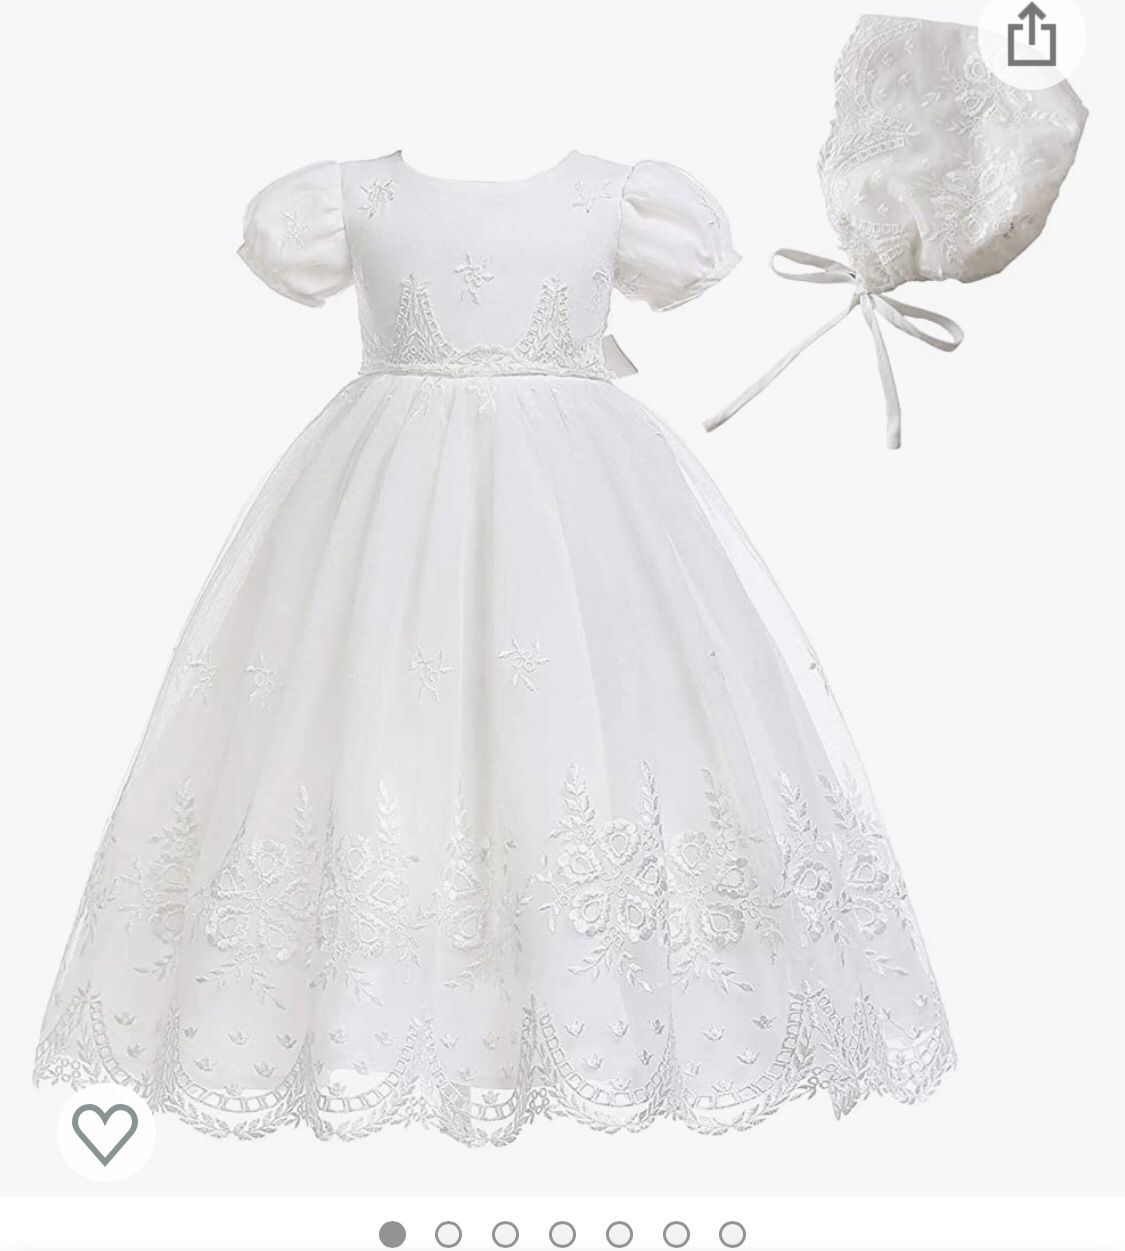 3Pcs Infant Baby Girl Tutu Tulle Wedding Gown Dress+ Lace Cardigan + Baptism Hat Party Outfits